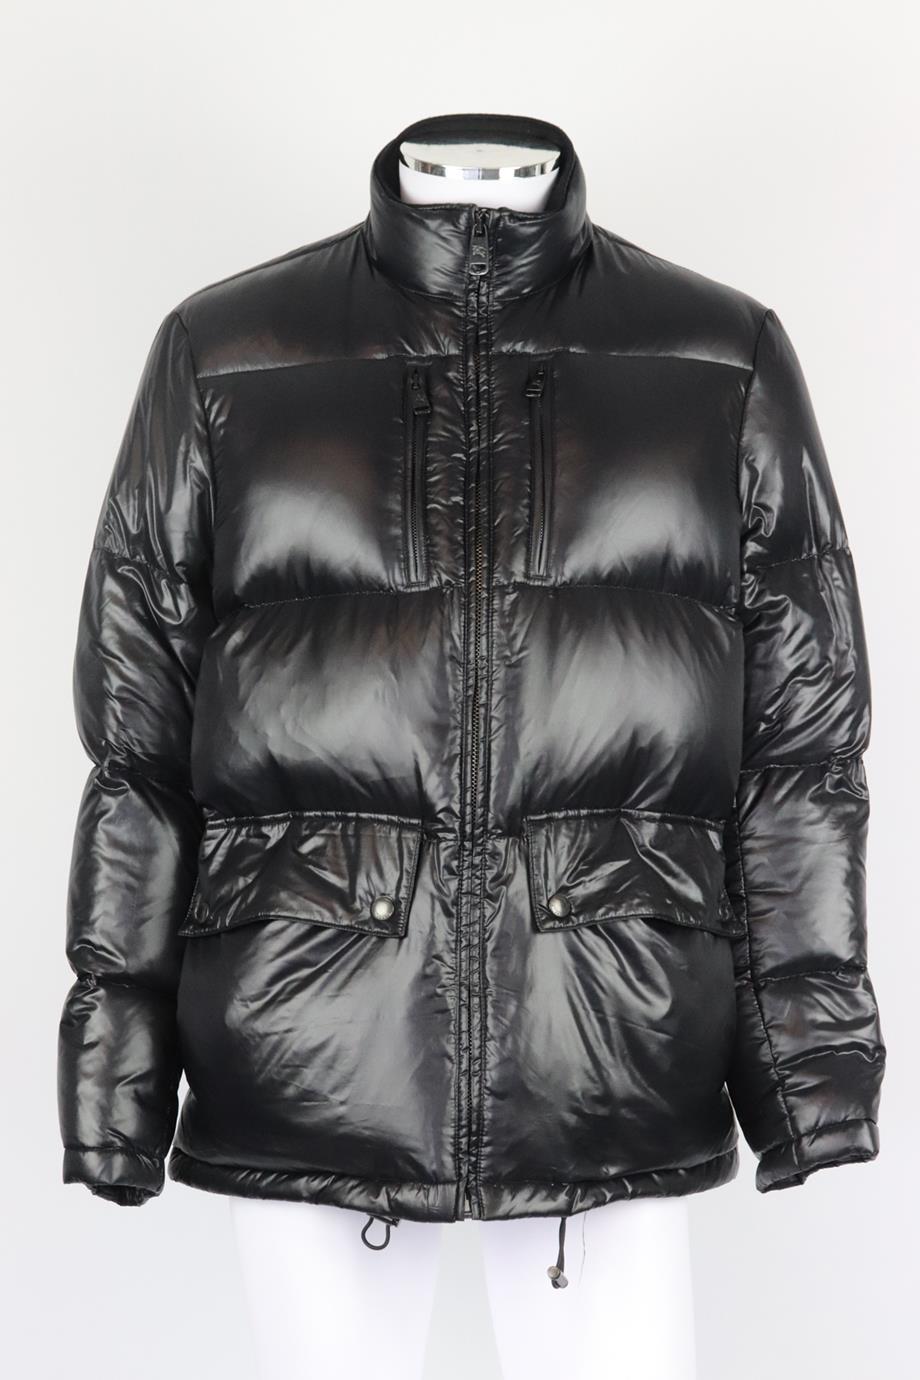 Burberry men's quilted shell down jacket. Black. Long sleeve, mock neck. Zip fastening at front. 100% Nylon; lining: 100% cotton; sleeve lining: 100% acetate; filling: 75% duck down, 25% feather. Size: Large (IT 50, EU 50, UK/US Chest 50). Shoulder